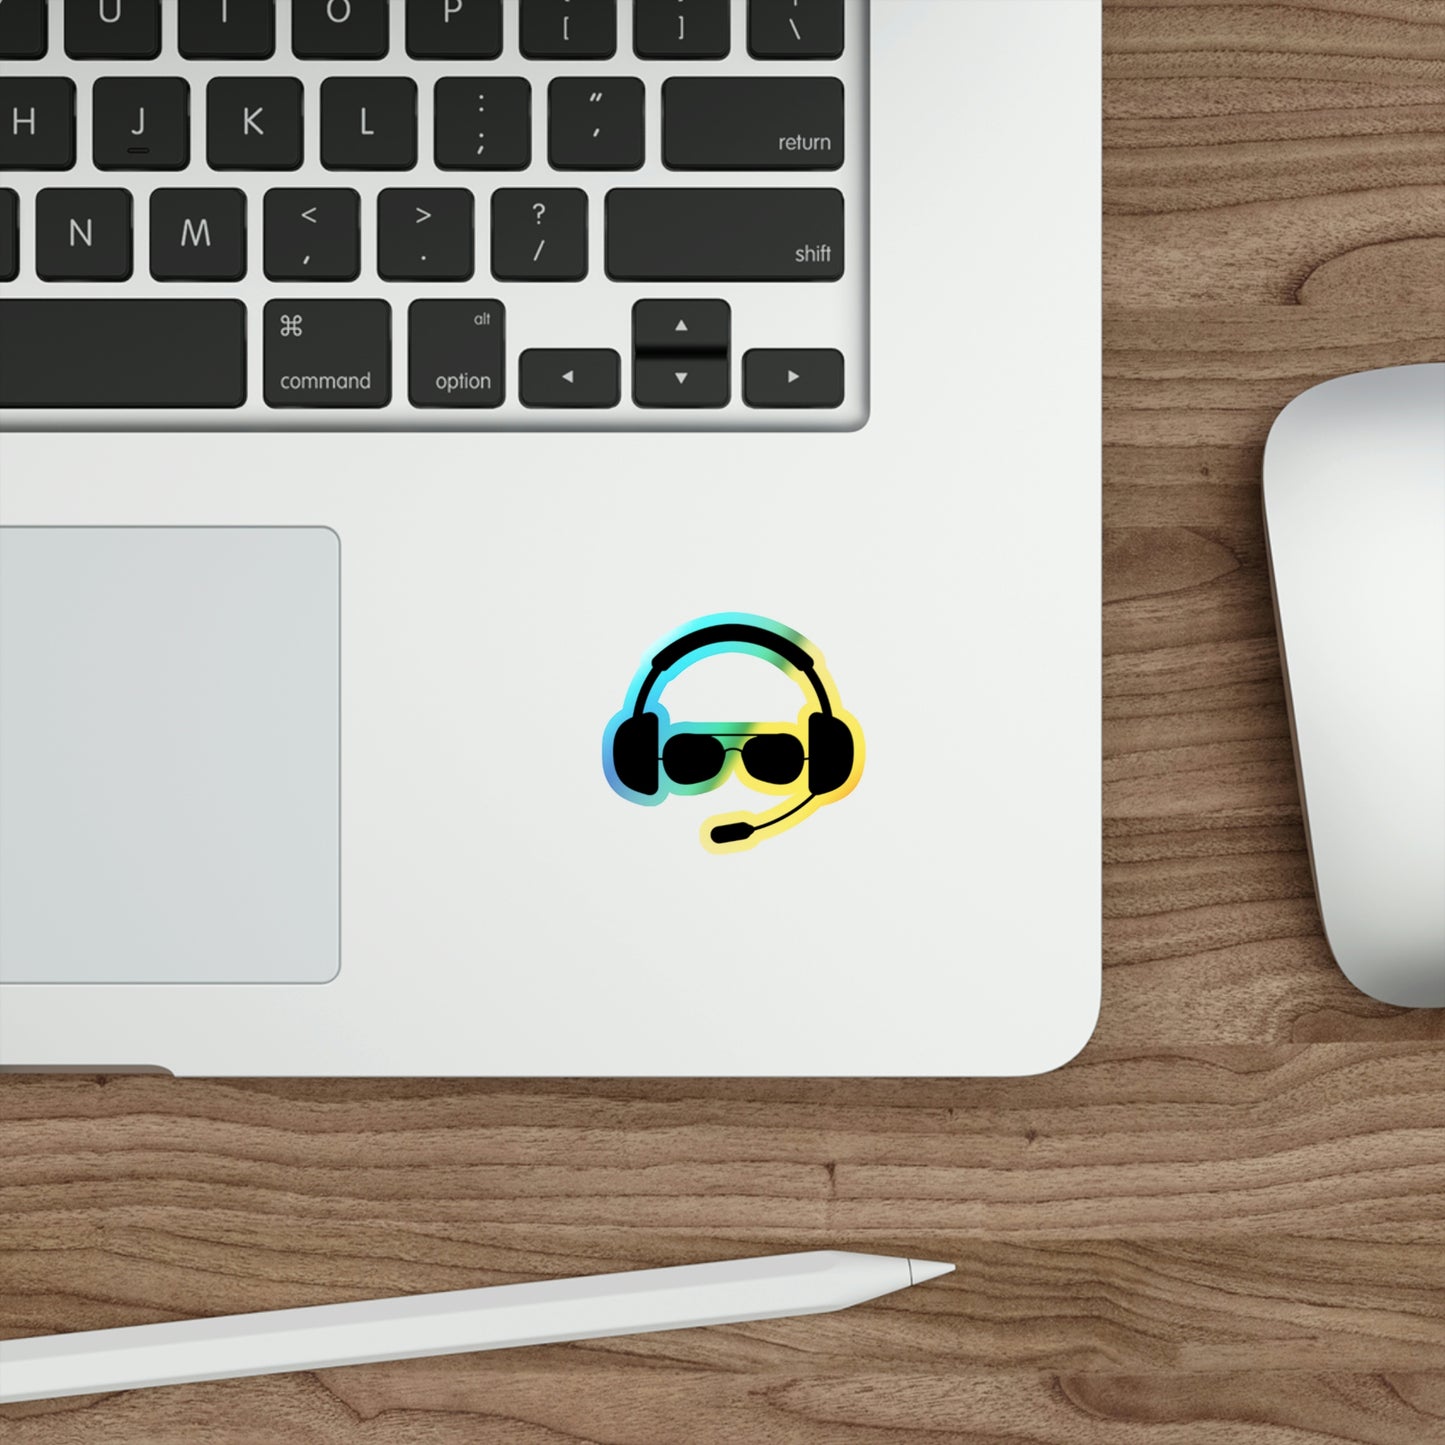 Pilot Headset and Sunglasses Holographic Die-cut Stickers